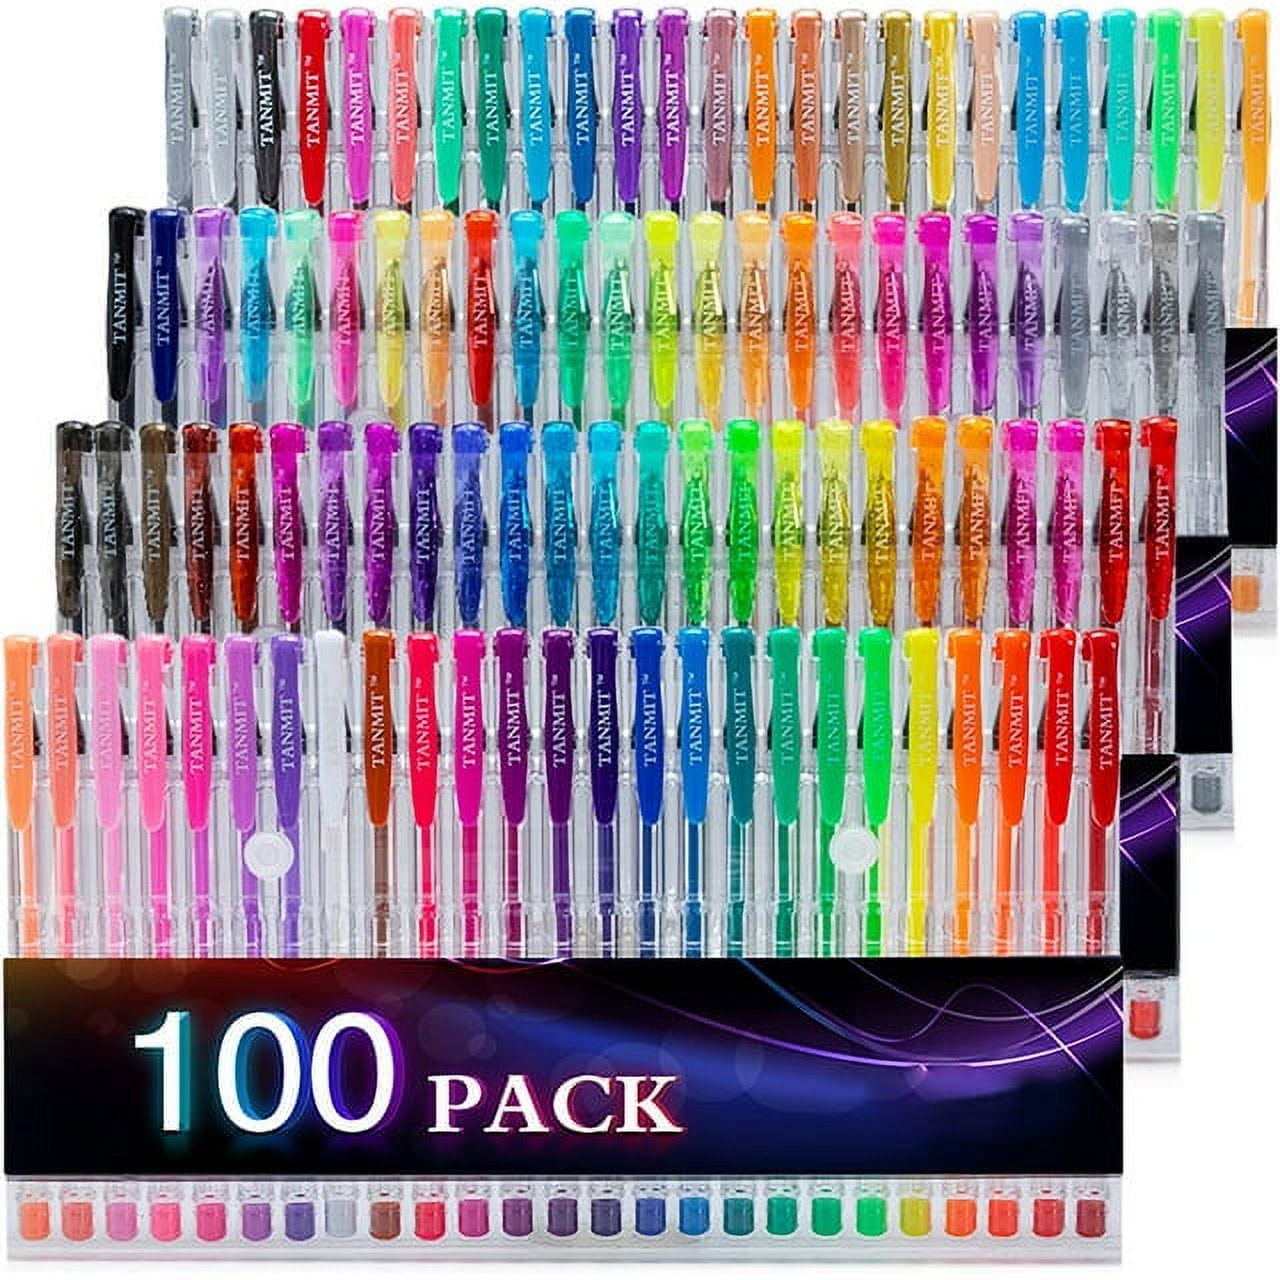 Tanmit 240 Gel Pens Set 120 Colored Gel Pen Plus 120 Refills For Adults  Coloring